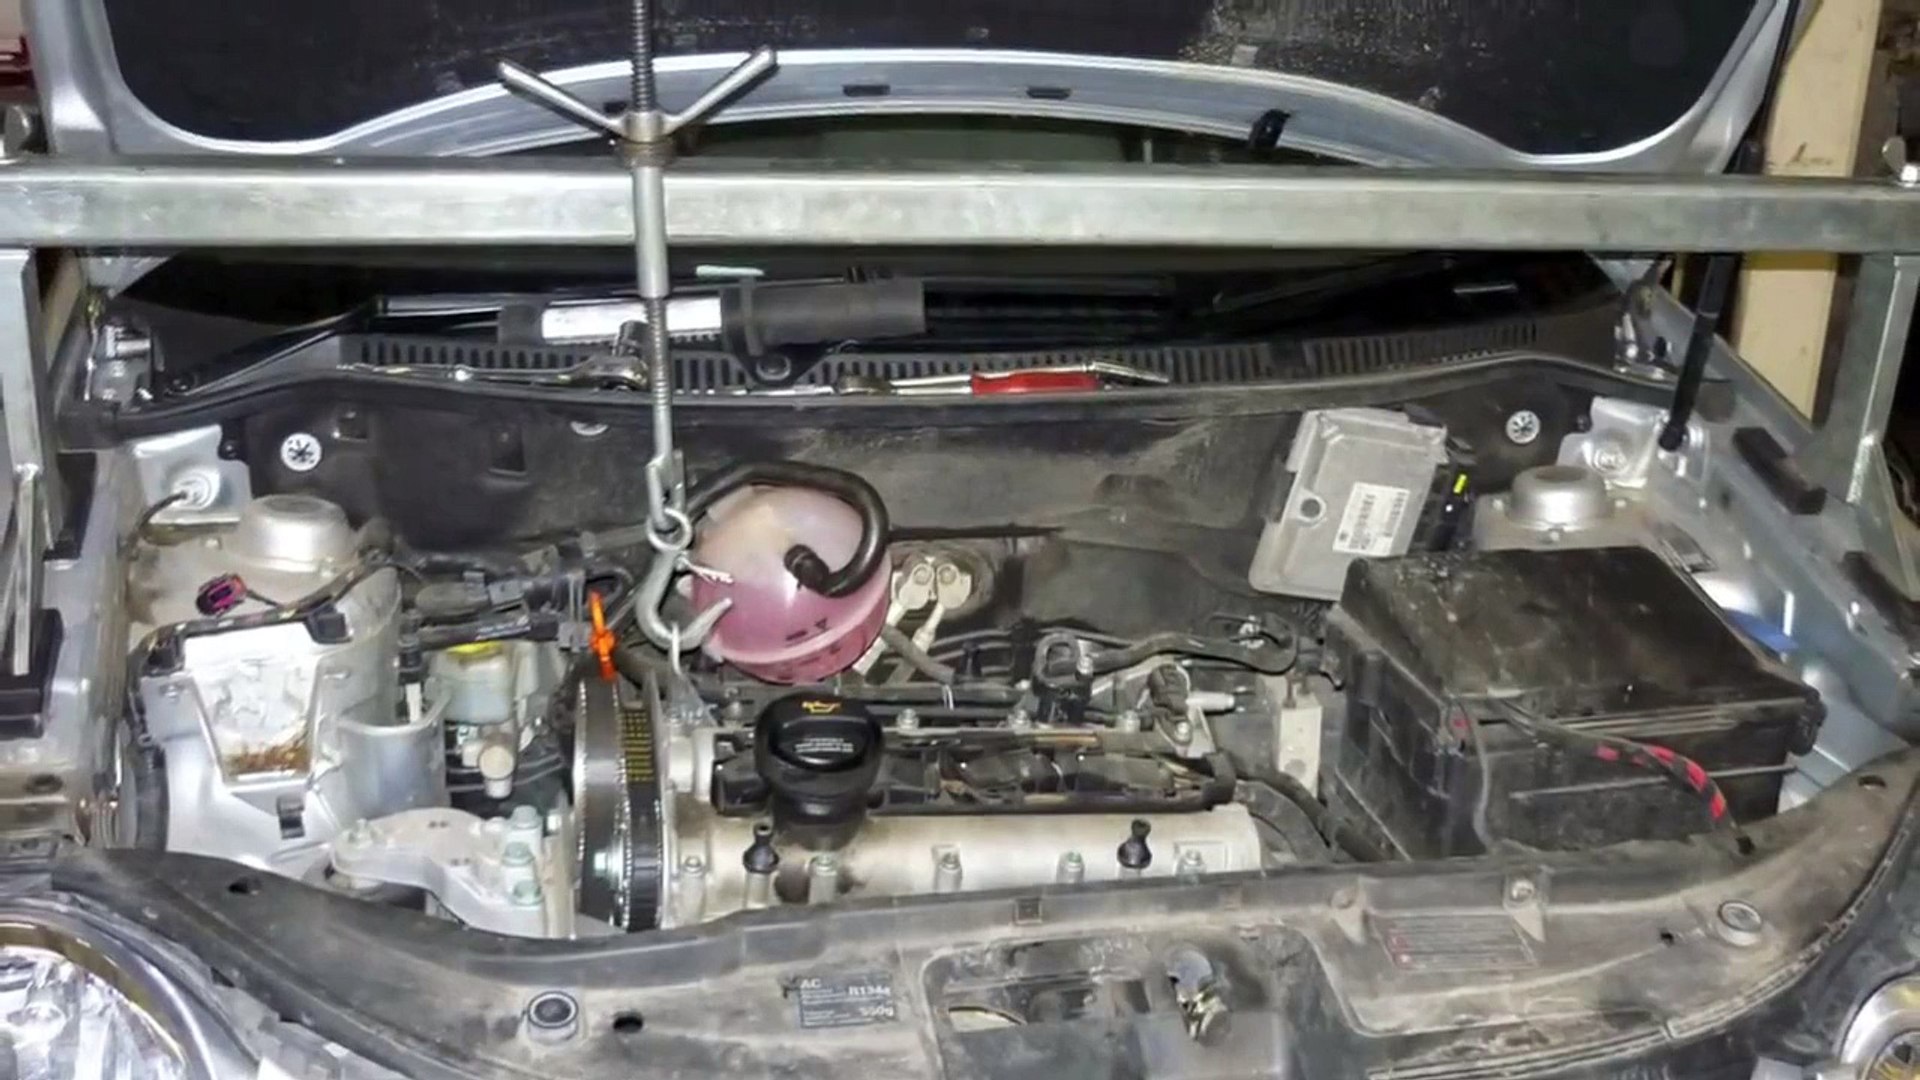 VW Polo 1.4 cambelt (timing belt) change - "How to" - video Dailymotion